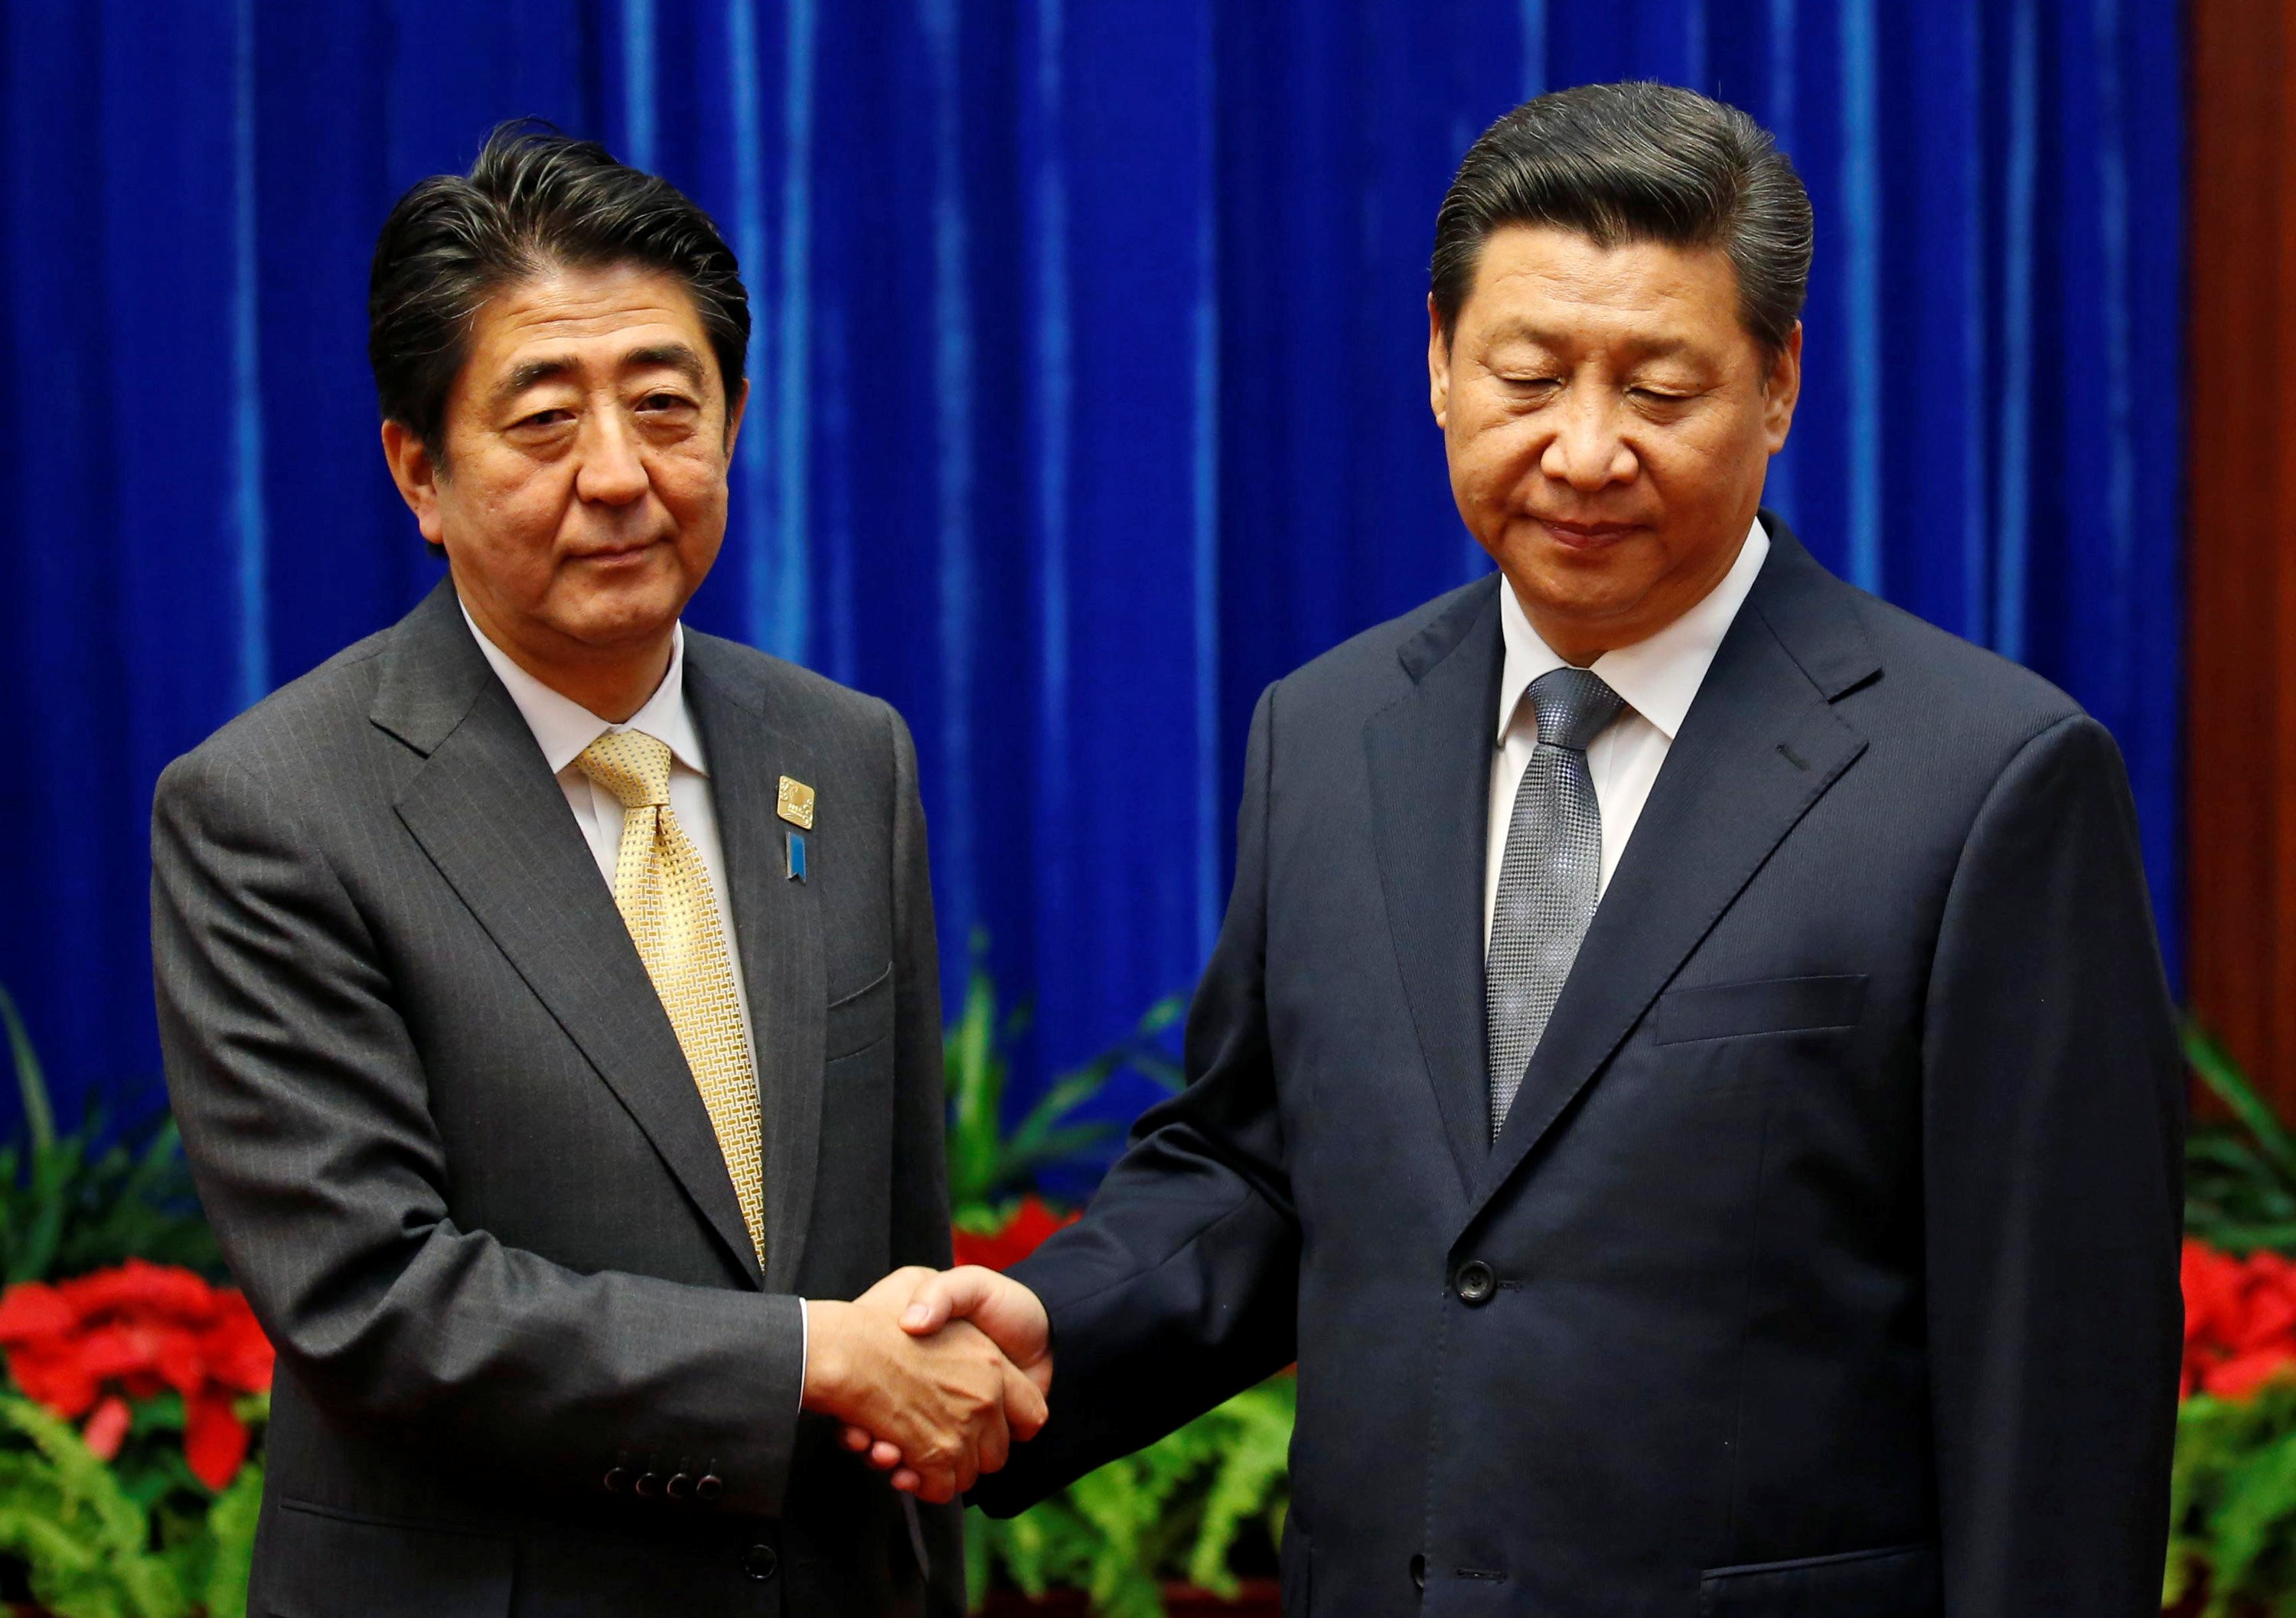 Japanese Prime Minister Shinzo Abe with Chinese President Xi Jinping. With an election victory on the cards, Abe will be focused on China relations. Photo: Reuters